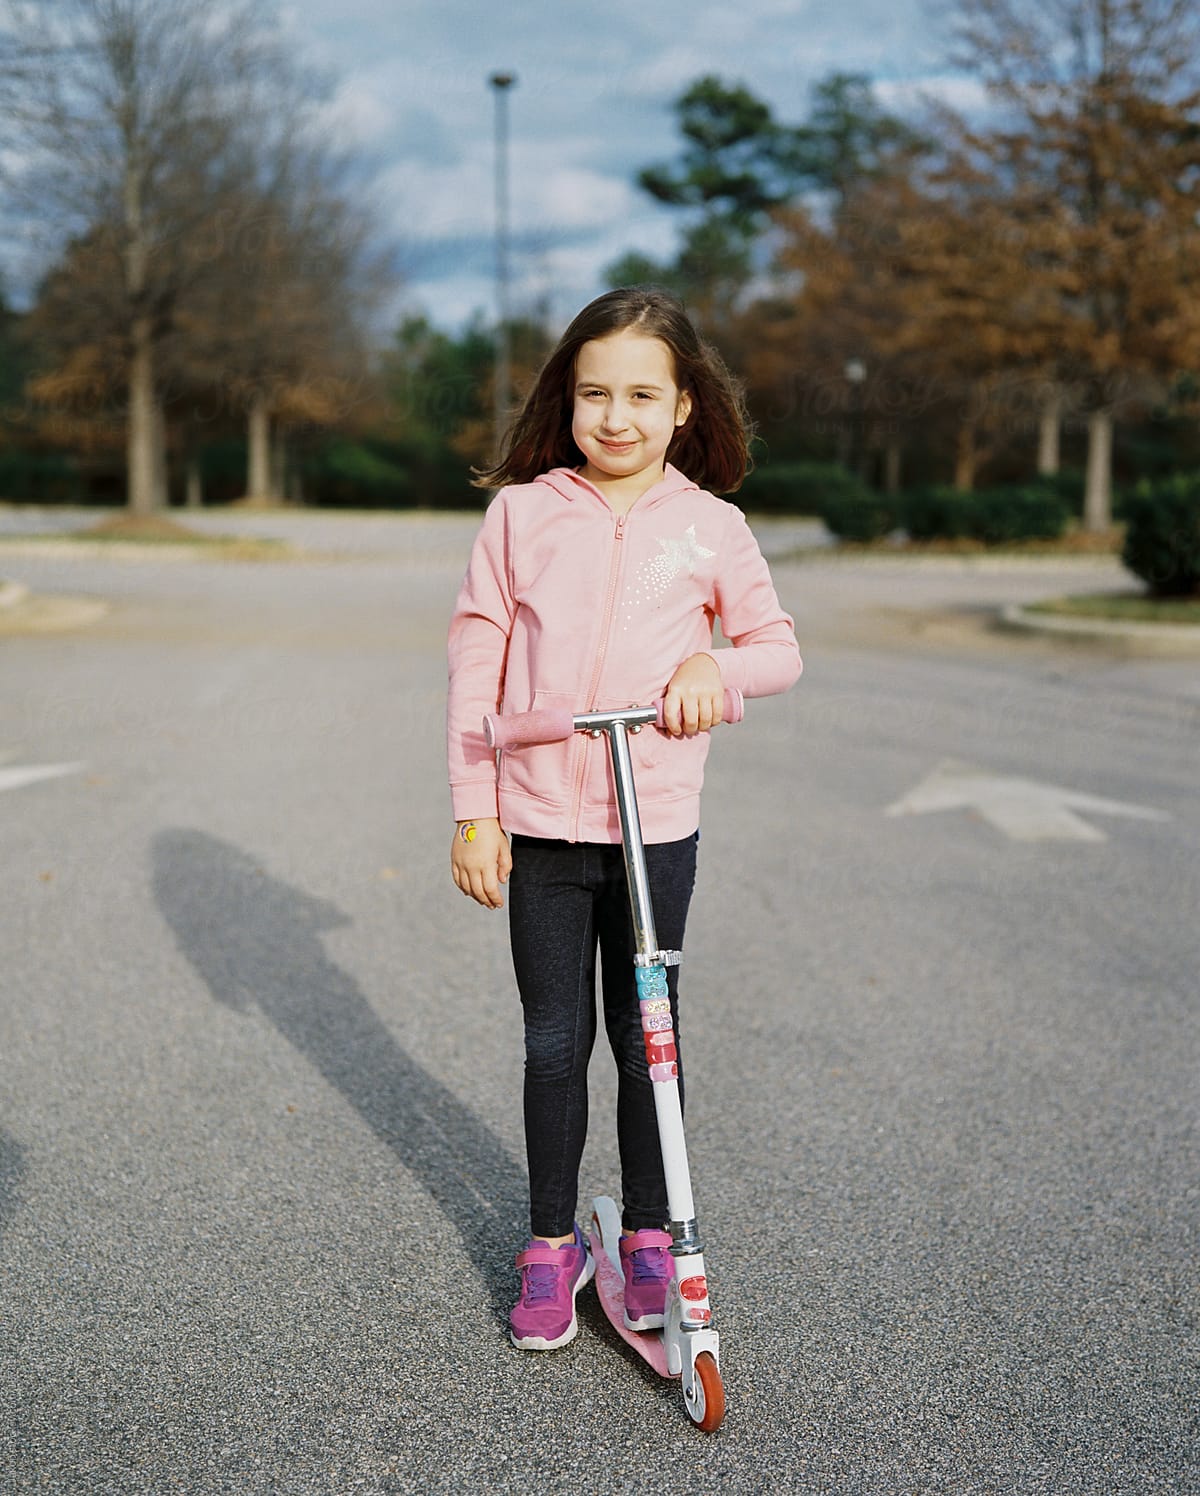 Cute Young Girl With A Scooter By Stocksy Contributor Jakob 